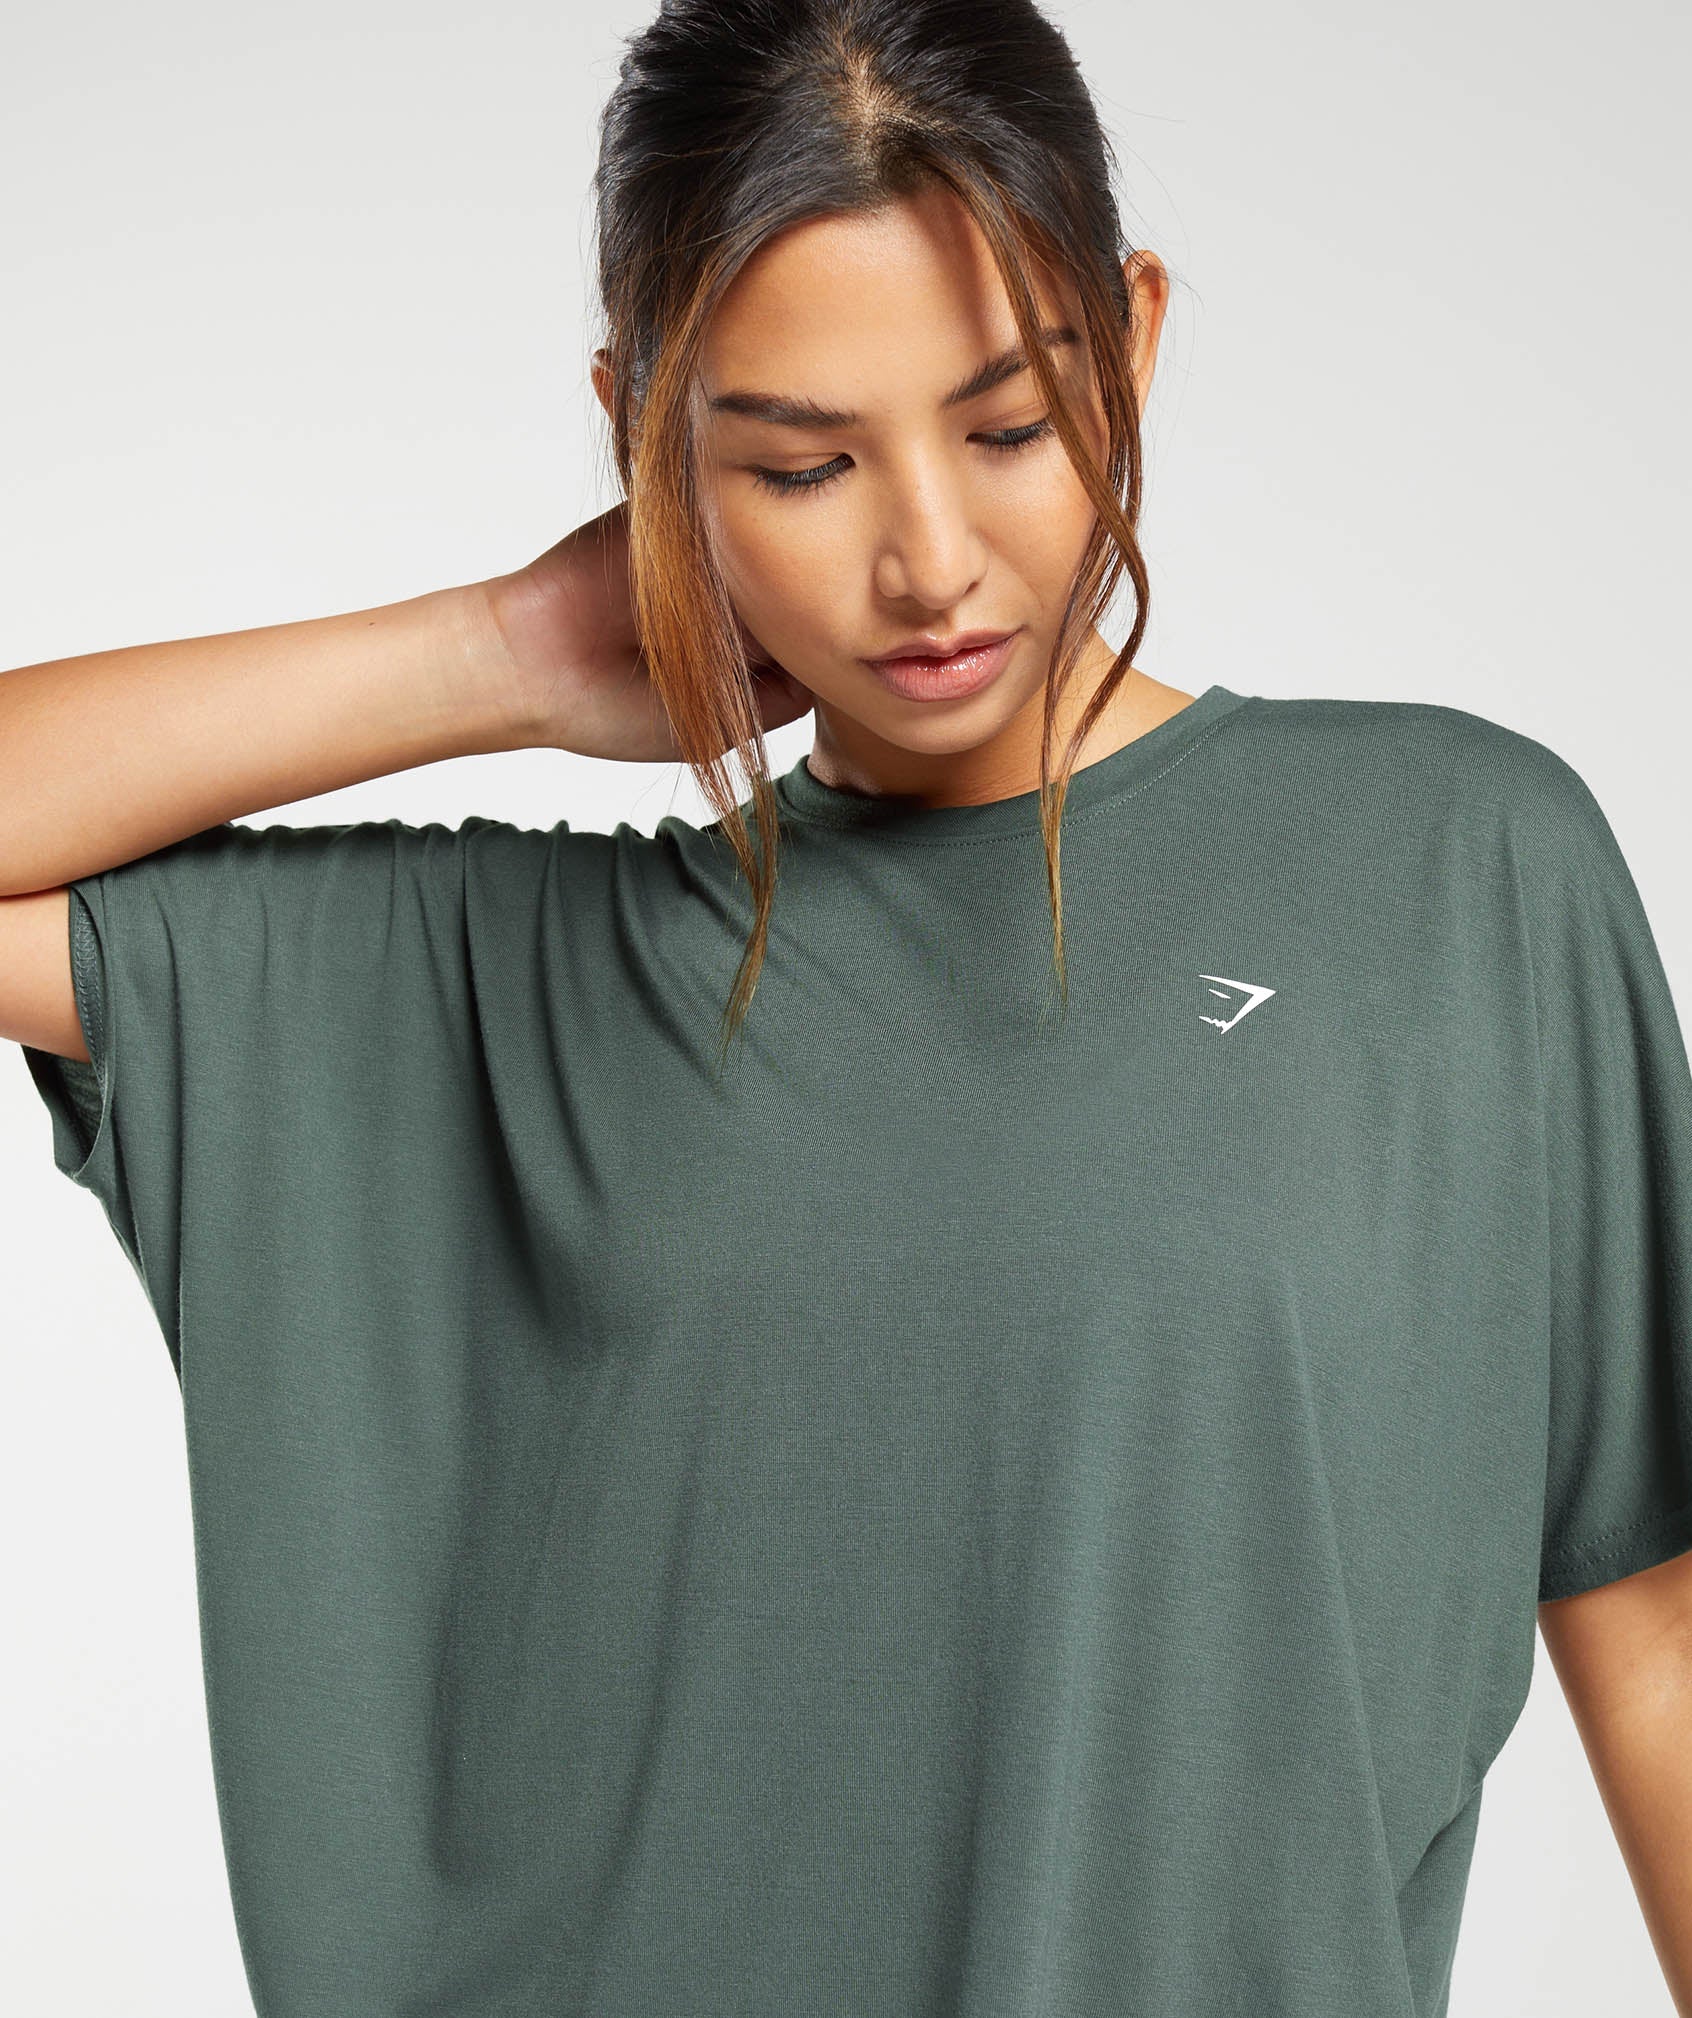 Super Soft T-Shirt in Slate Teal - view 5